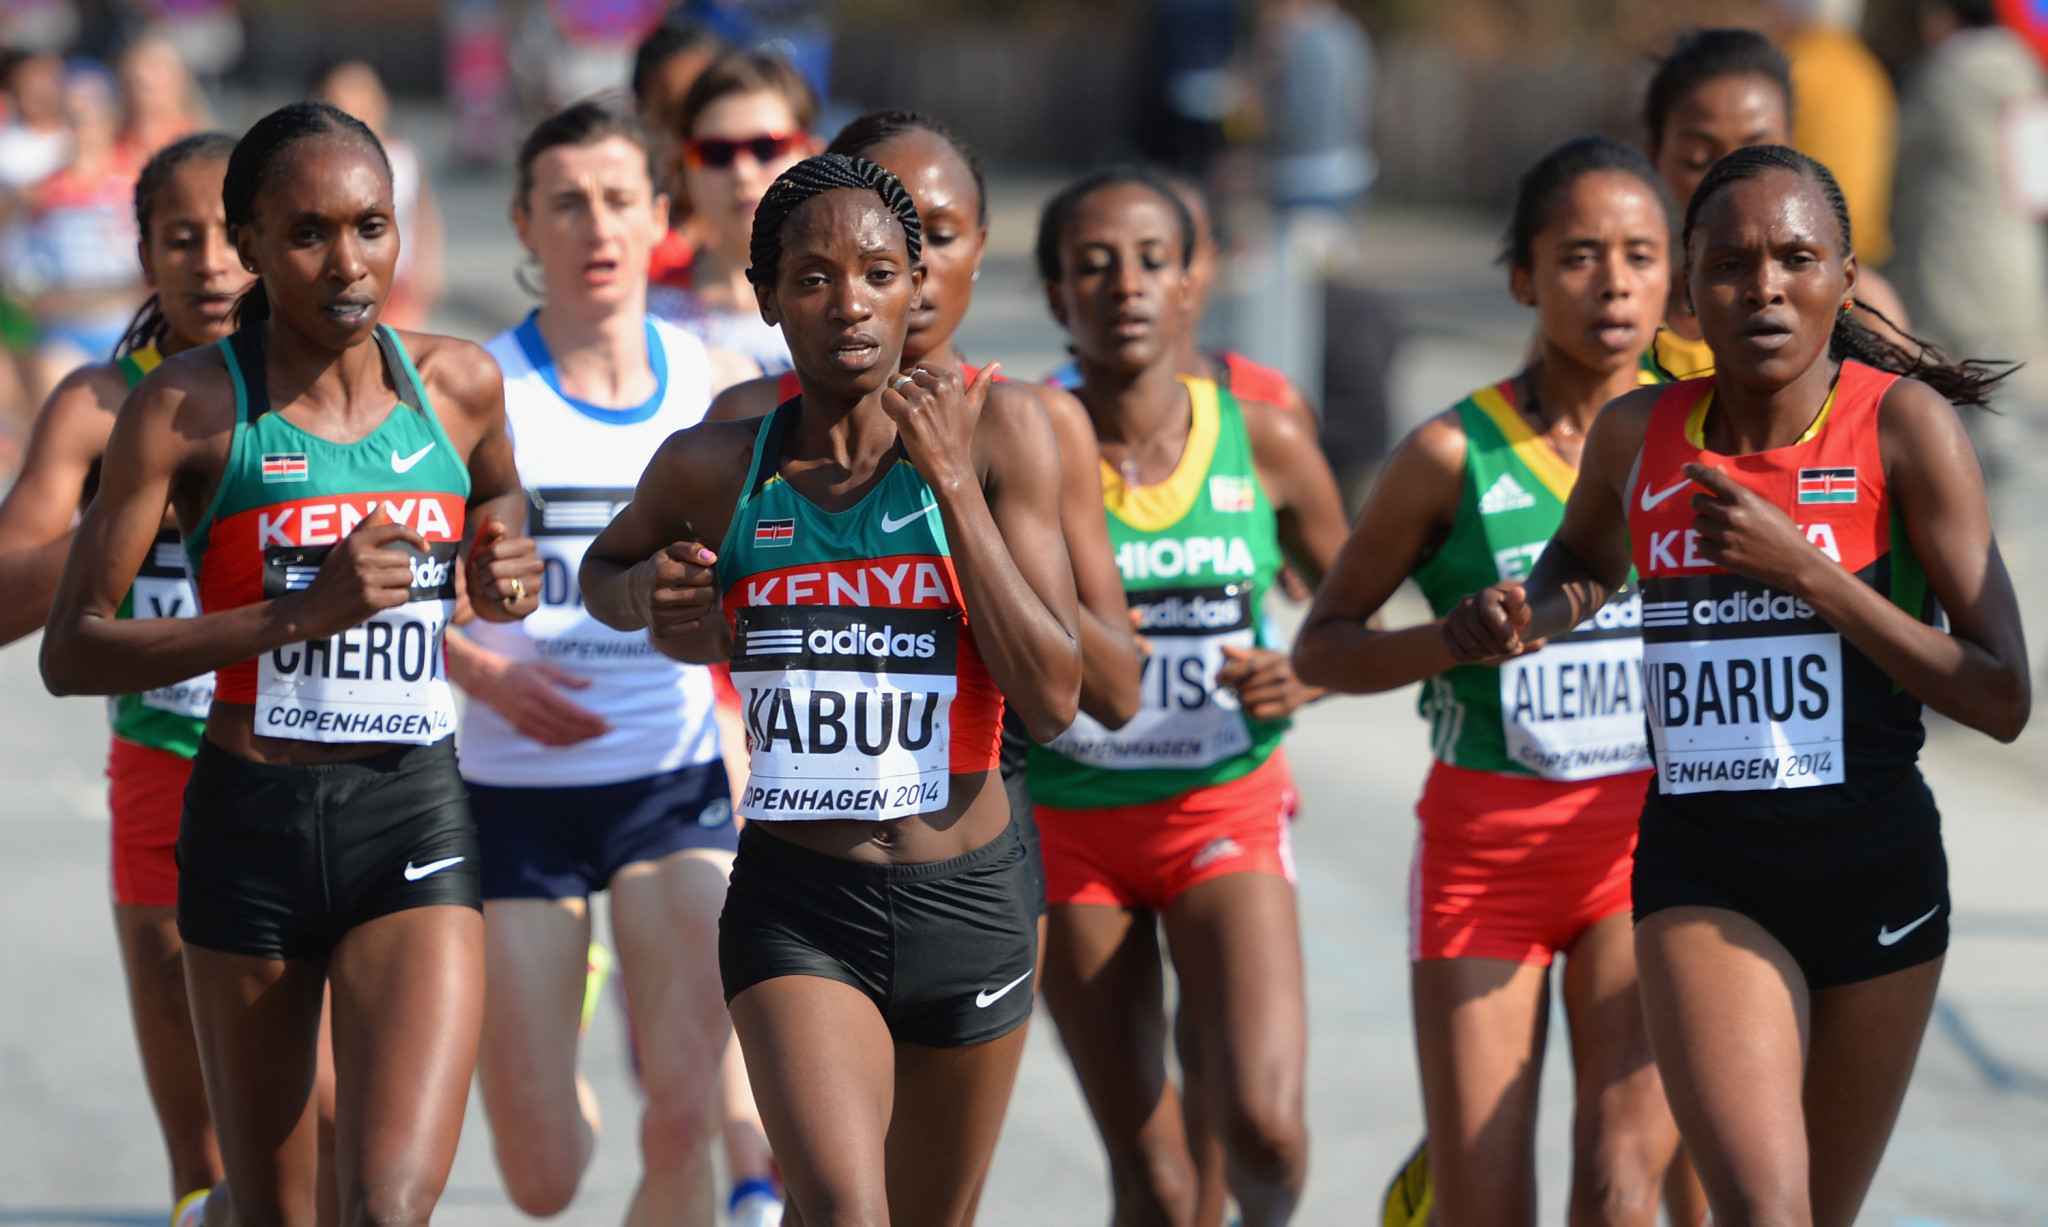 Kenya's Wangui handed two-year doping ban by Athletics Integrity Unit